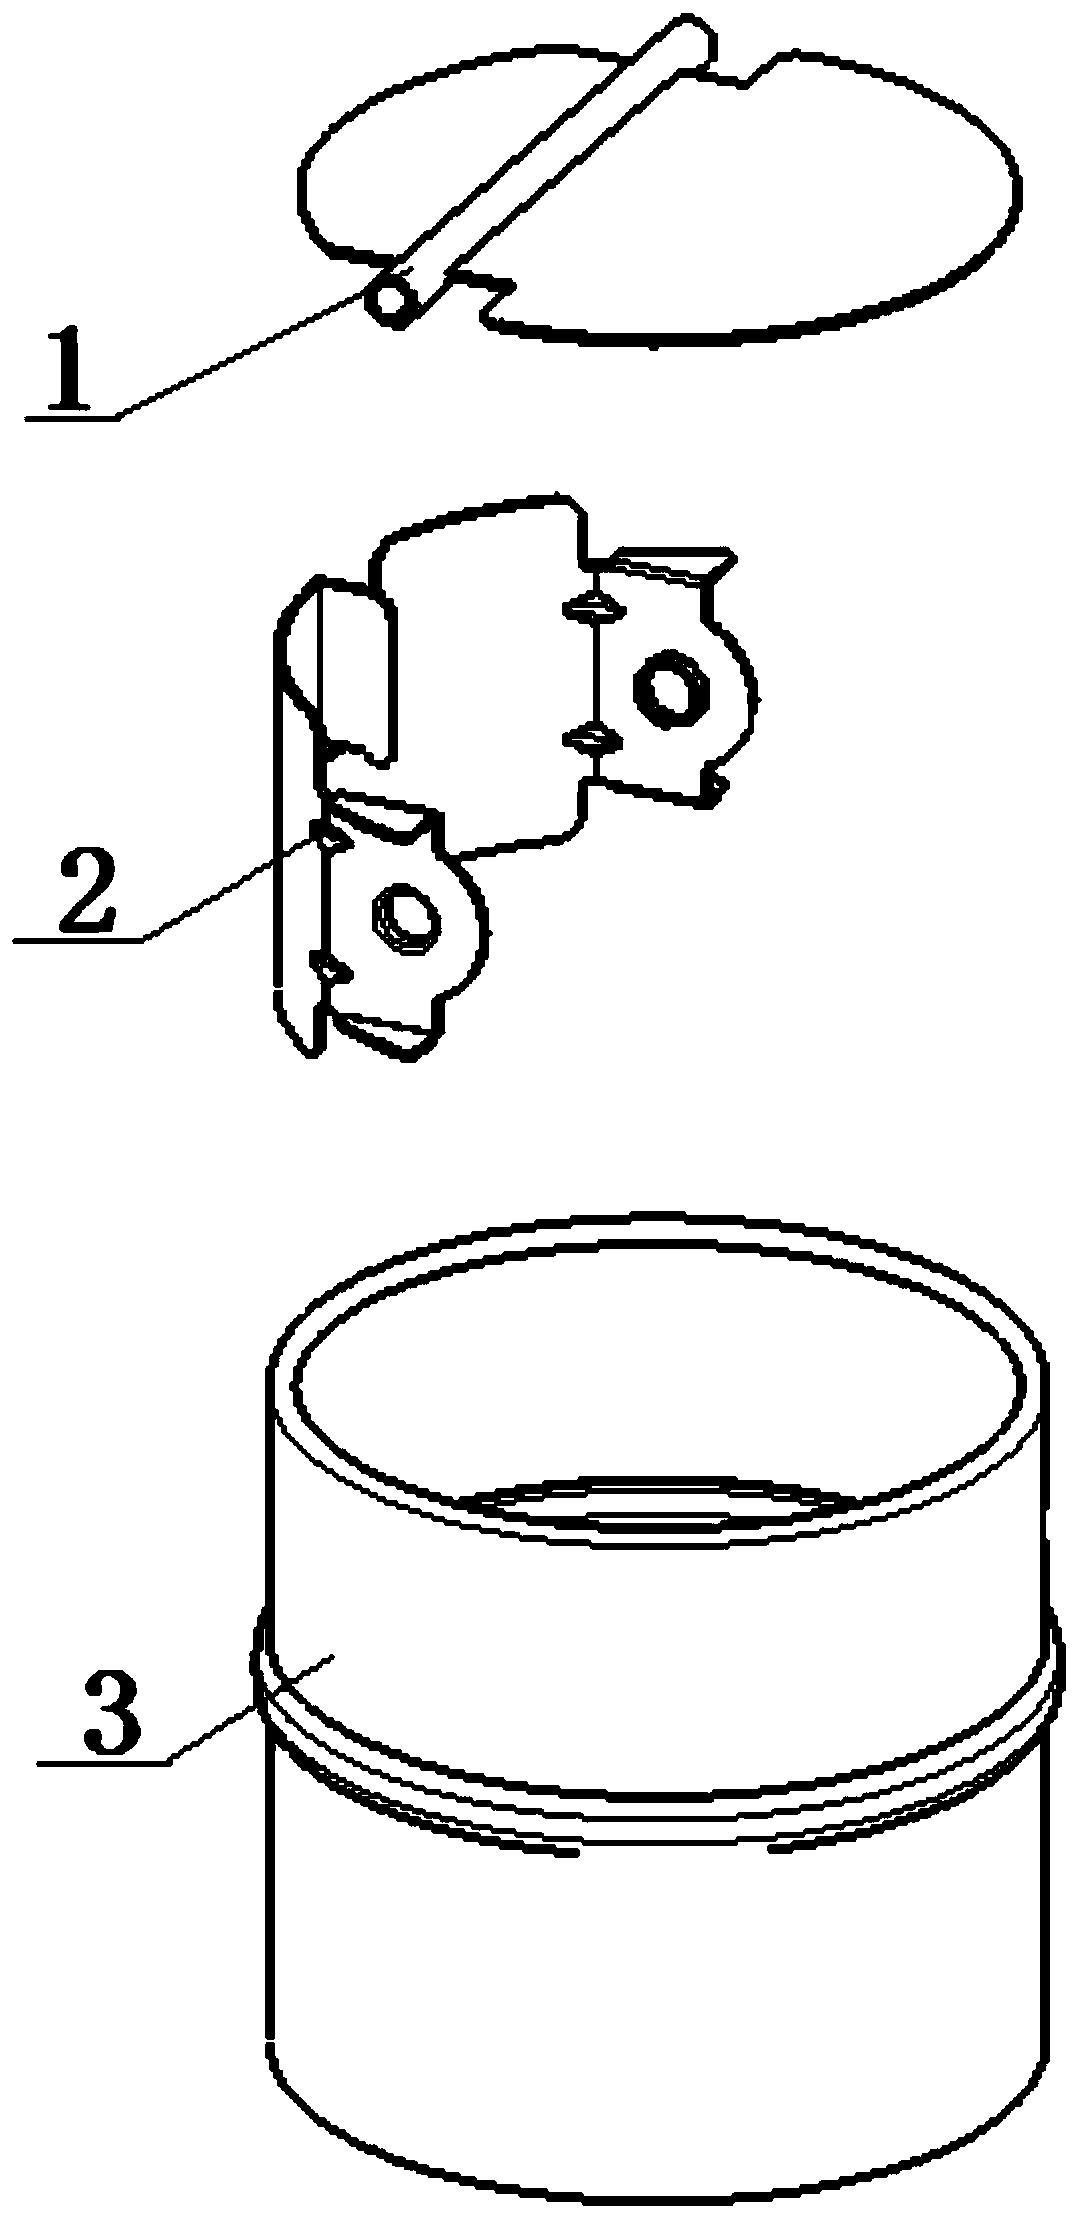 An anti-windback structure for the top cylinder of the smoke collecting hood of a gas water heater